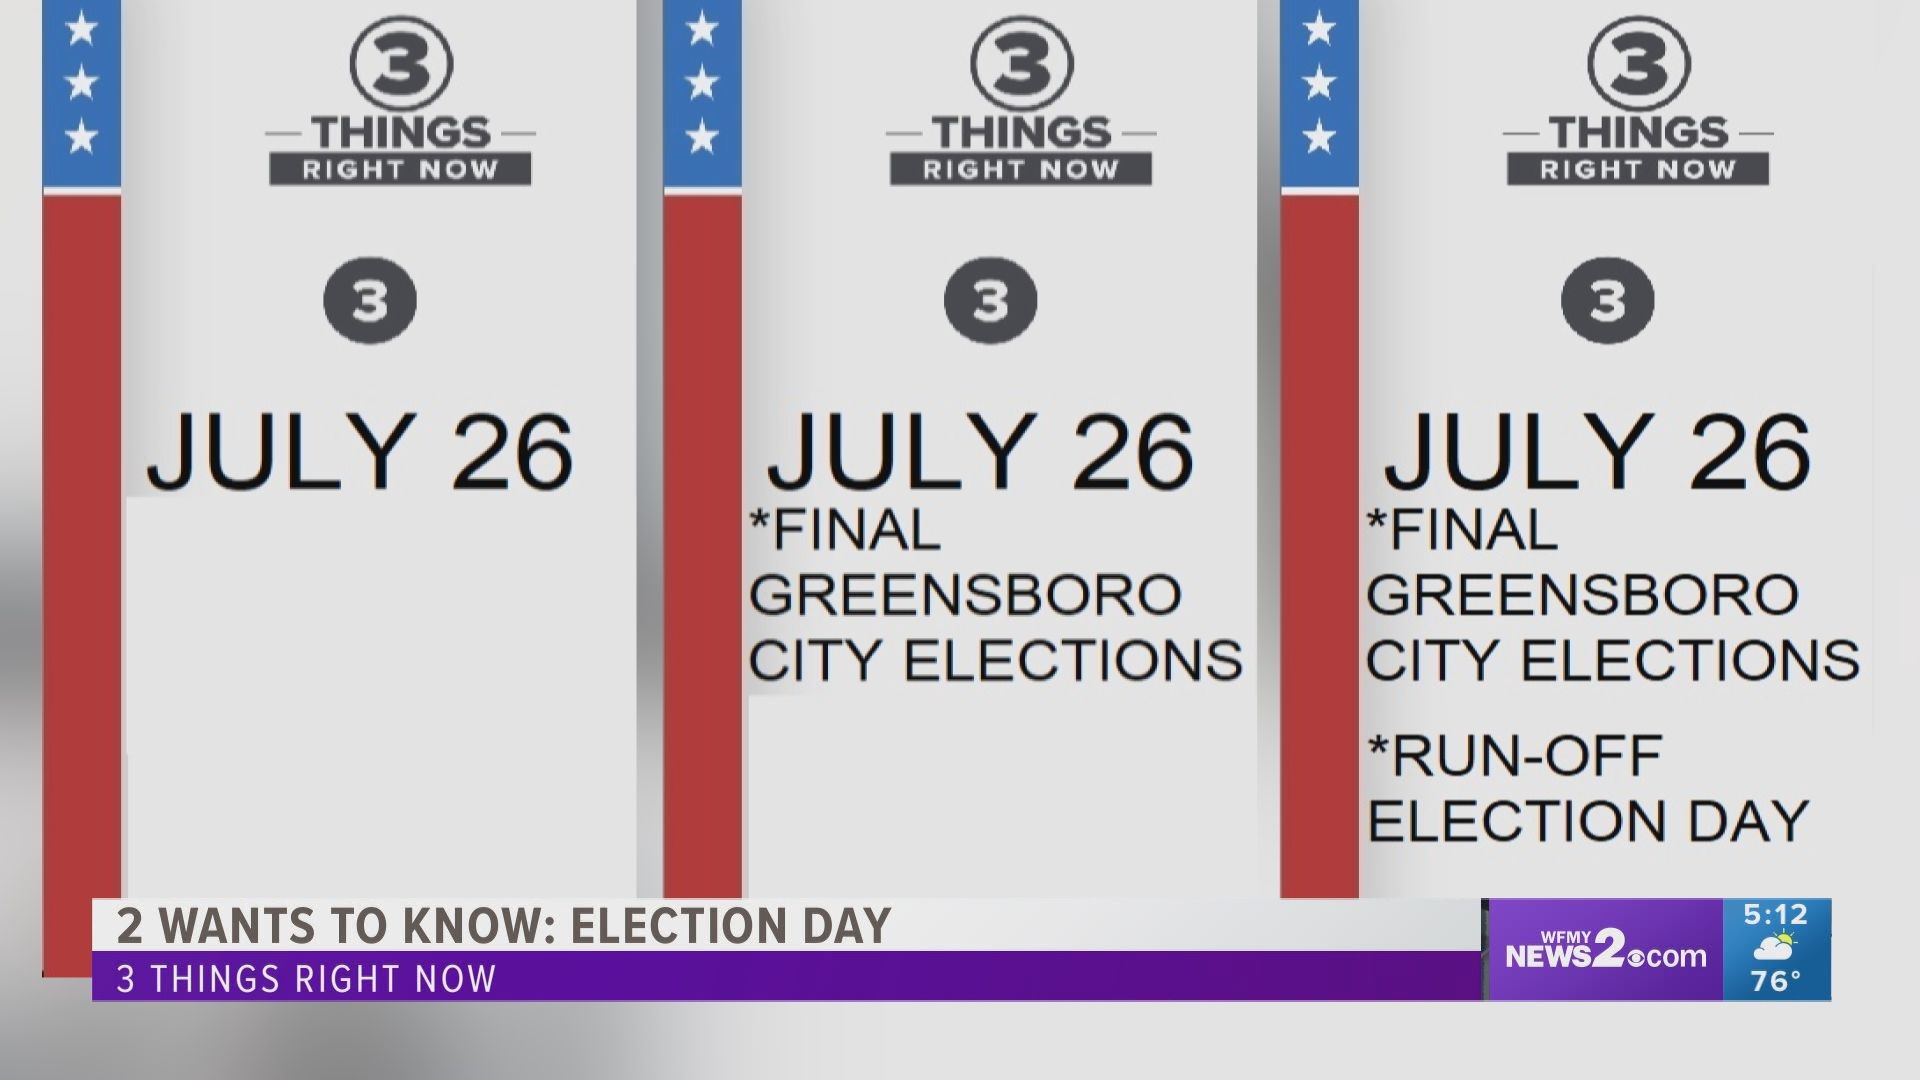 The primary is May 17. If there is a run-off it will be July 26. Greensboro residents go to the polls for sure in July.